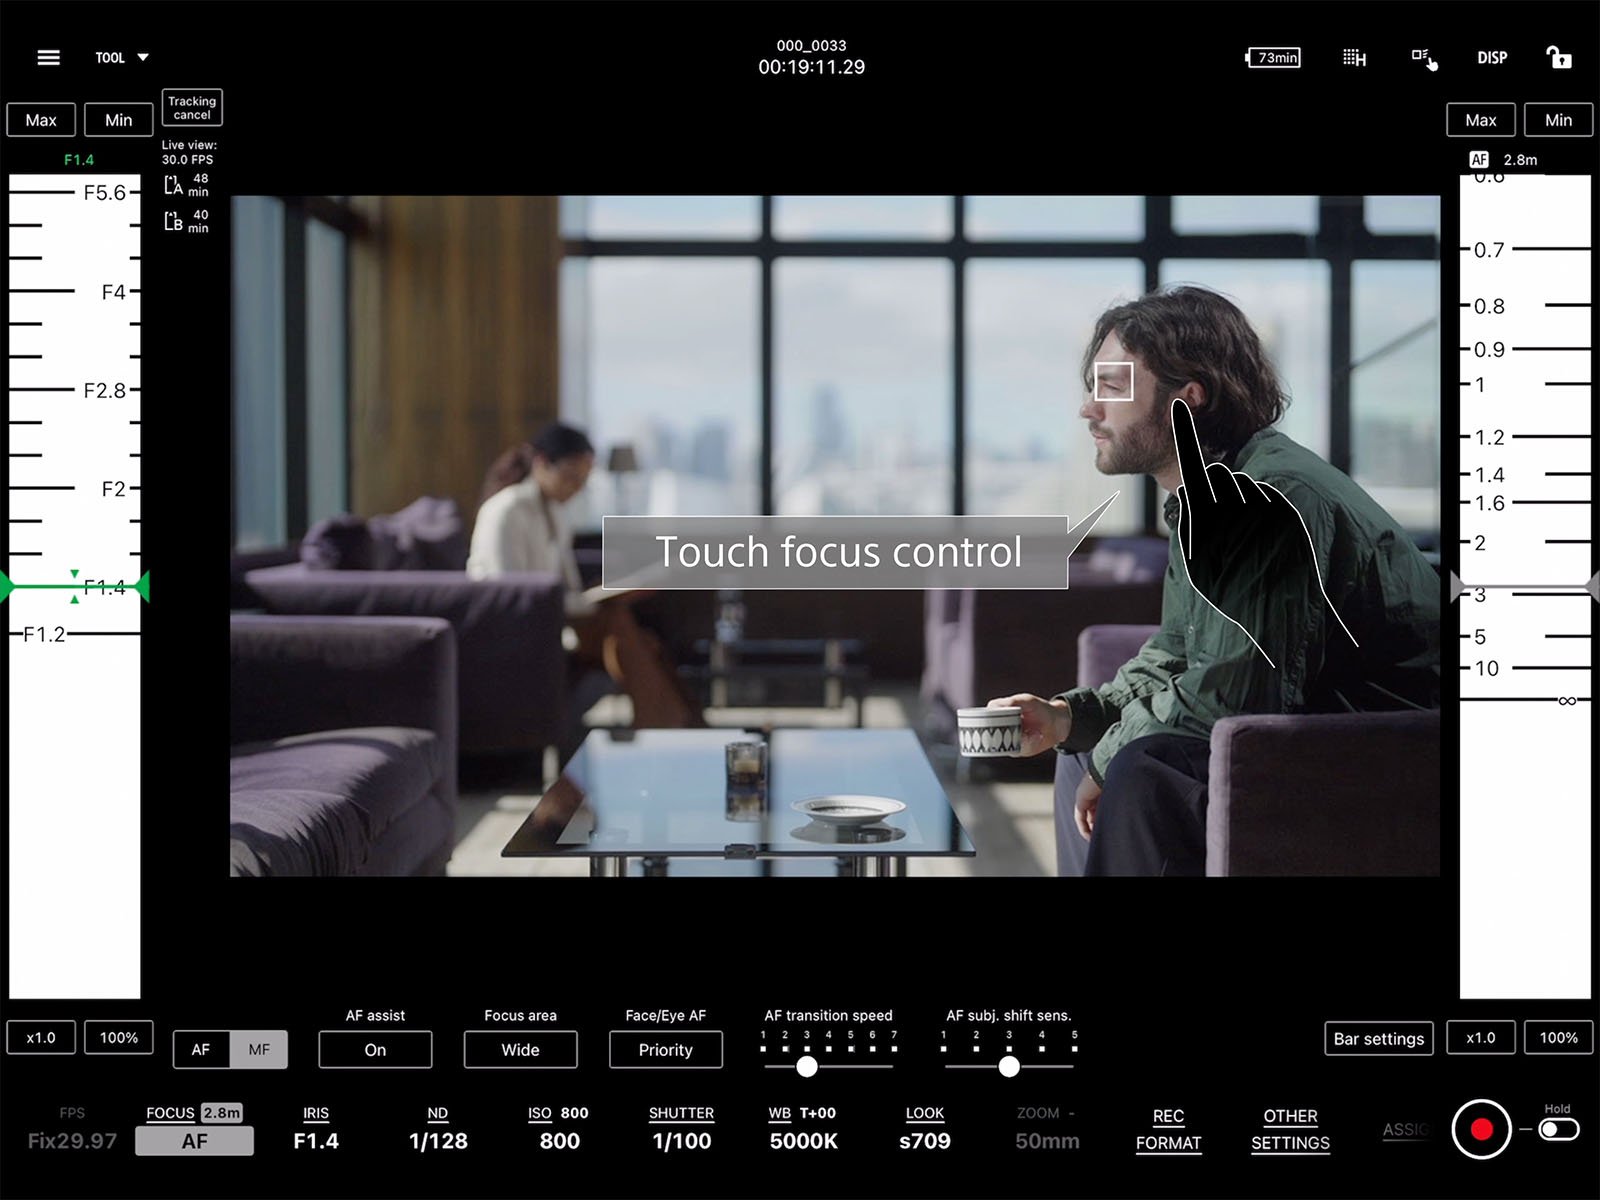 A camera interface displays a person sitting on a couch in a modern room with large windows and a city view. The interface highlights the "Touch focus control" feature, focusing on the person holding a cup. Various camera settings and controls are visible.